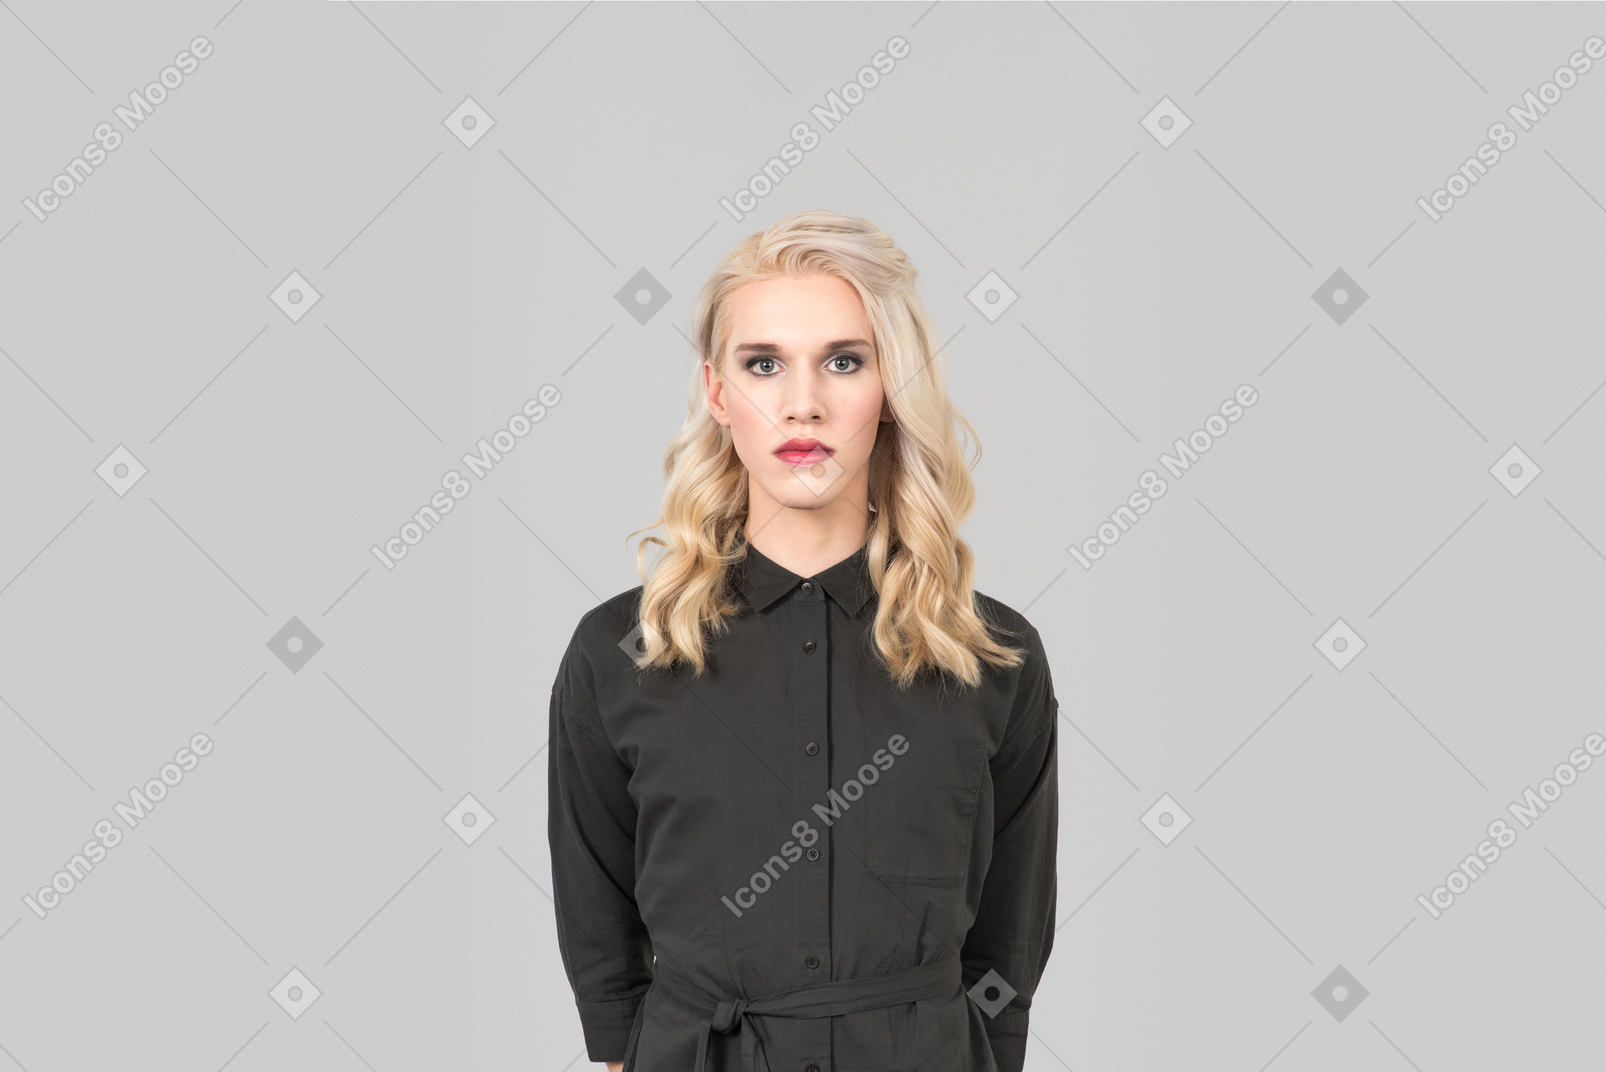 Beautiful trans person in a black dress and with makeup on, standing against the plain grey background, looking forward with a serious face expression